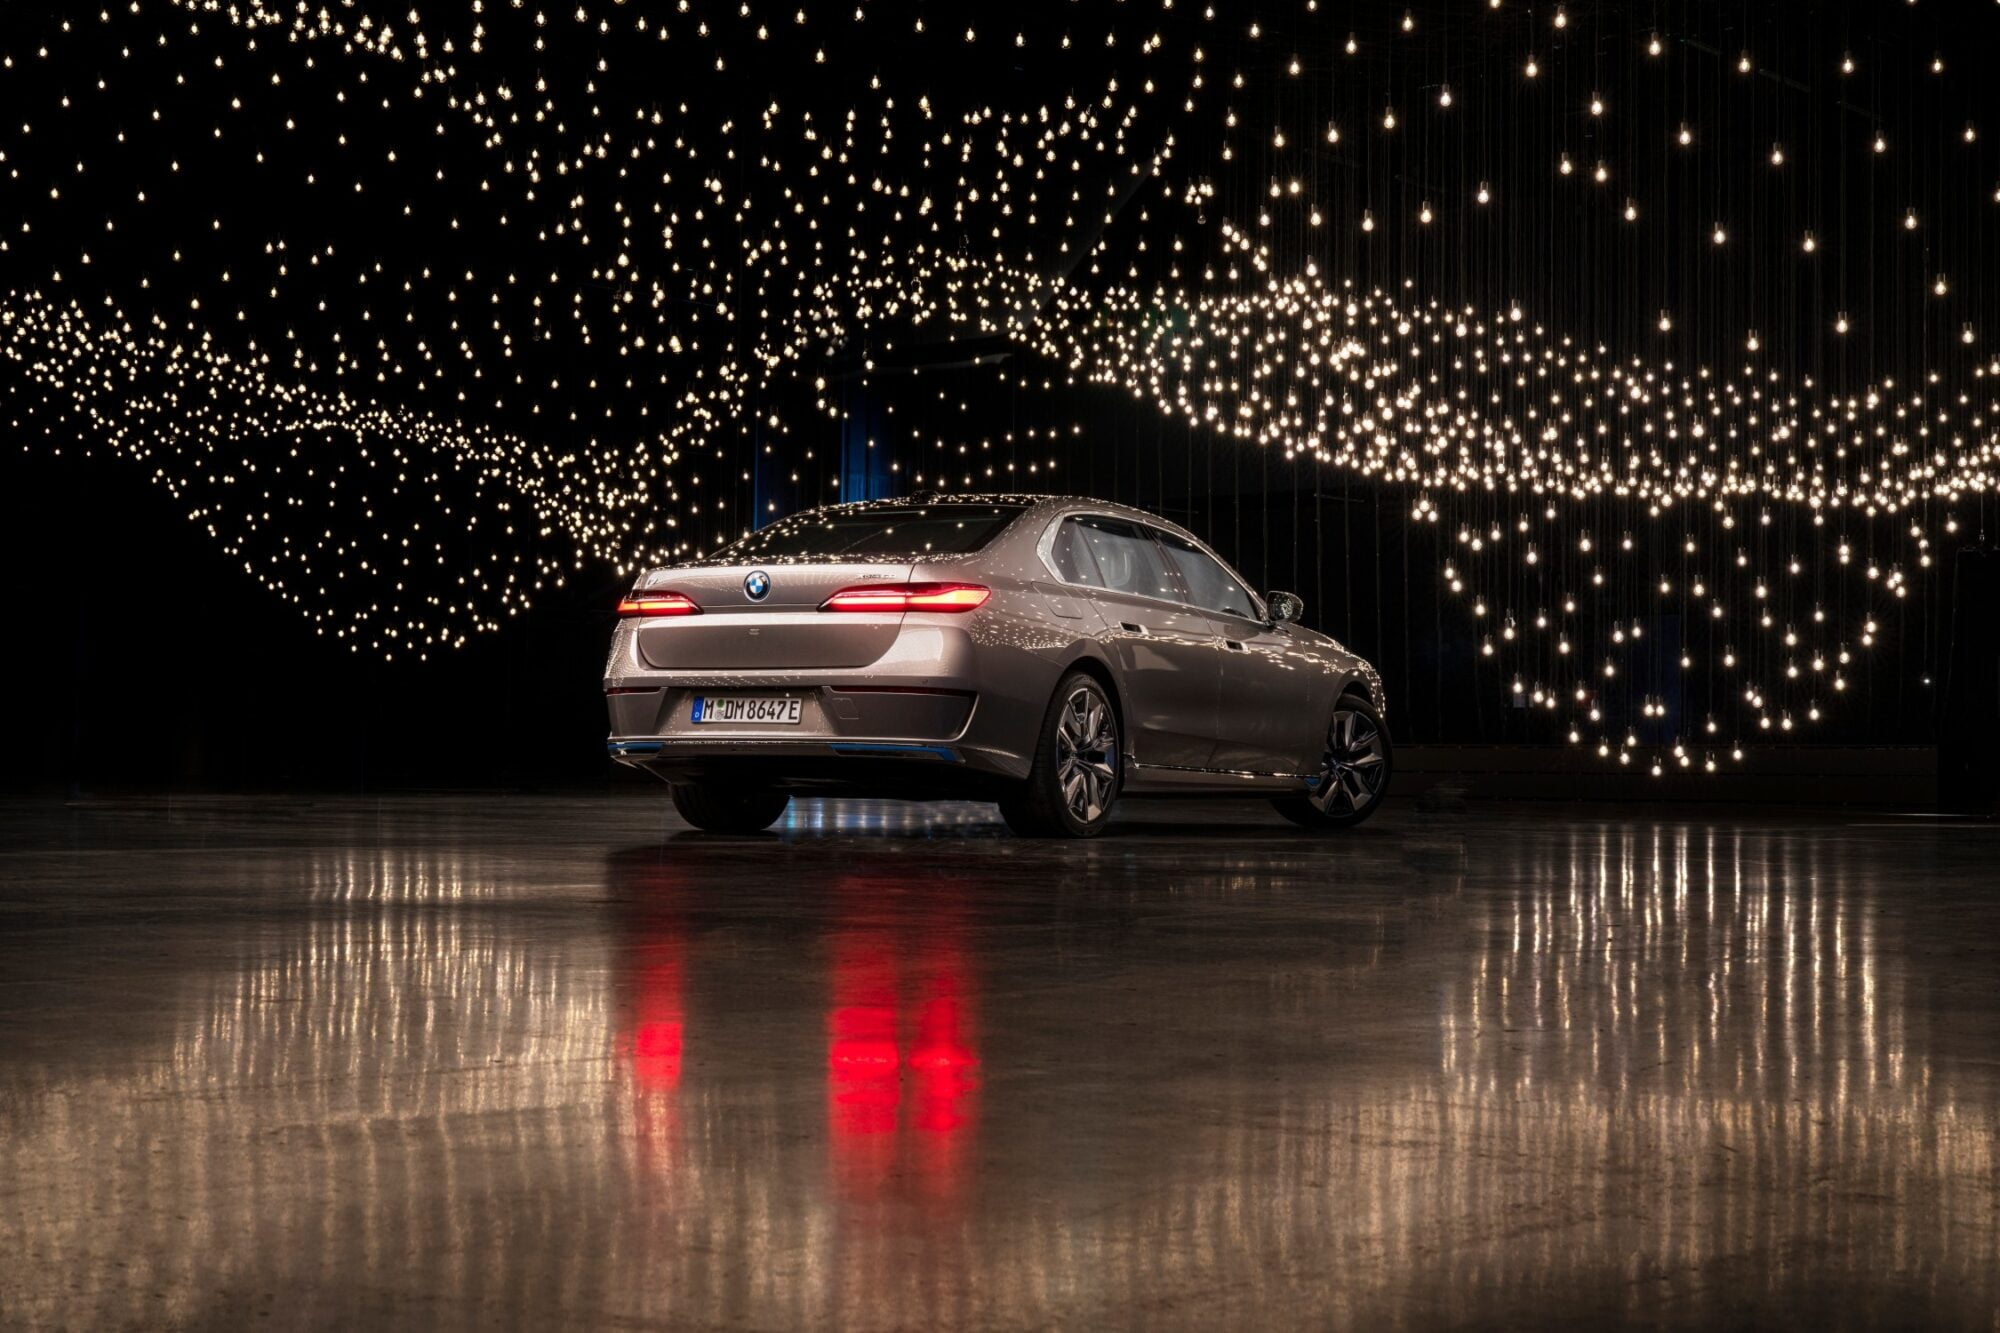 On the occasion of Art Basel in Basel 2022, Superblue and BMW i present Rafael Lozano-Hemmer's “Pulse Topology”